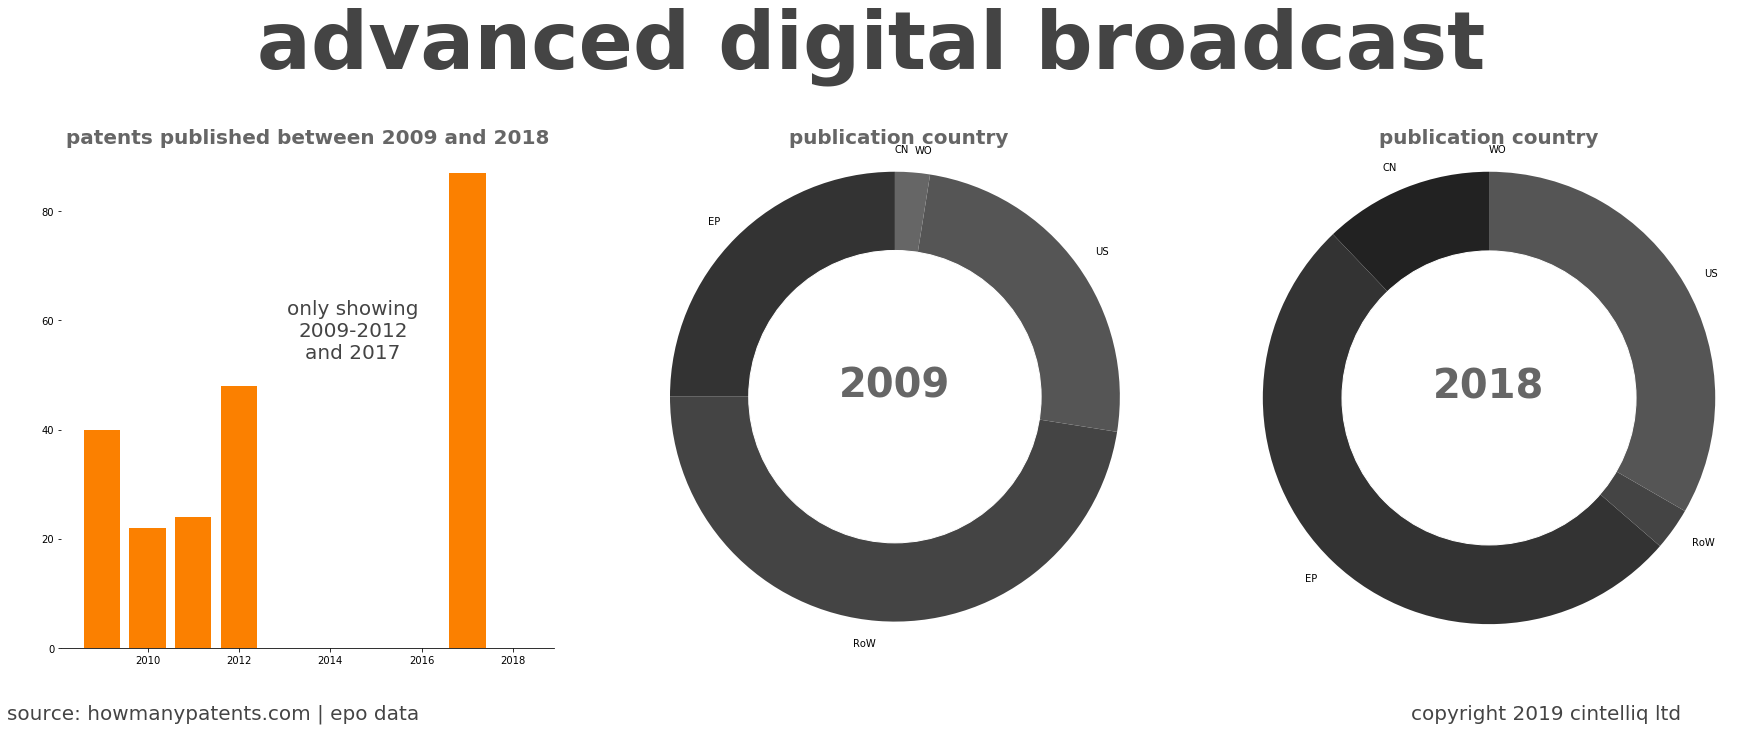 summary of patents for Advanced Digital Broadcast